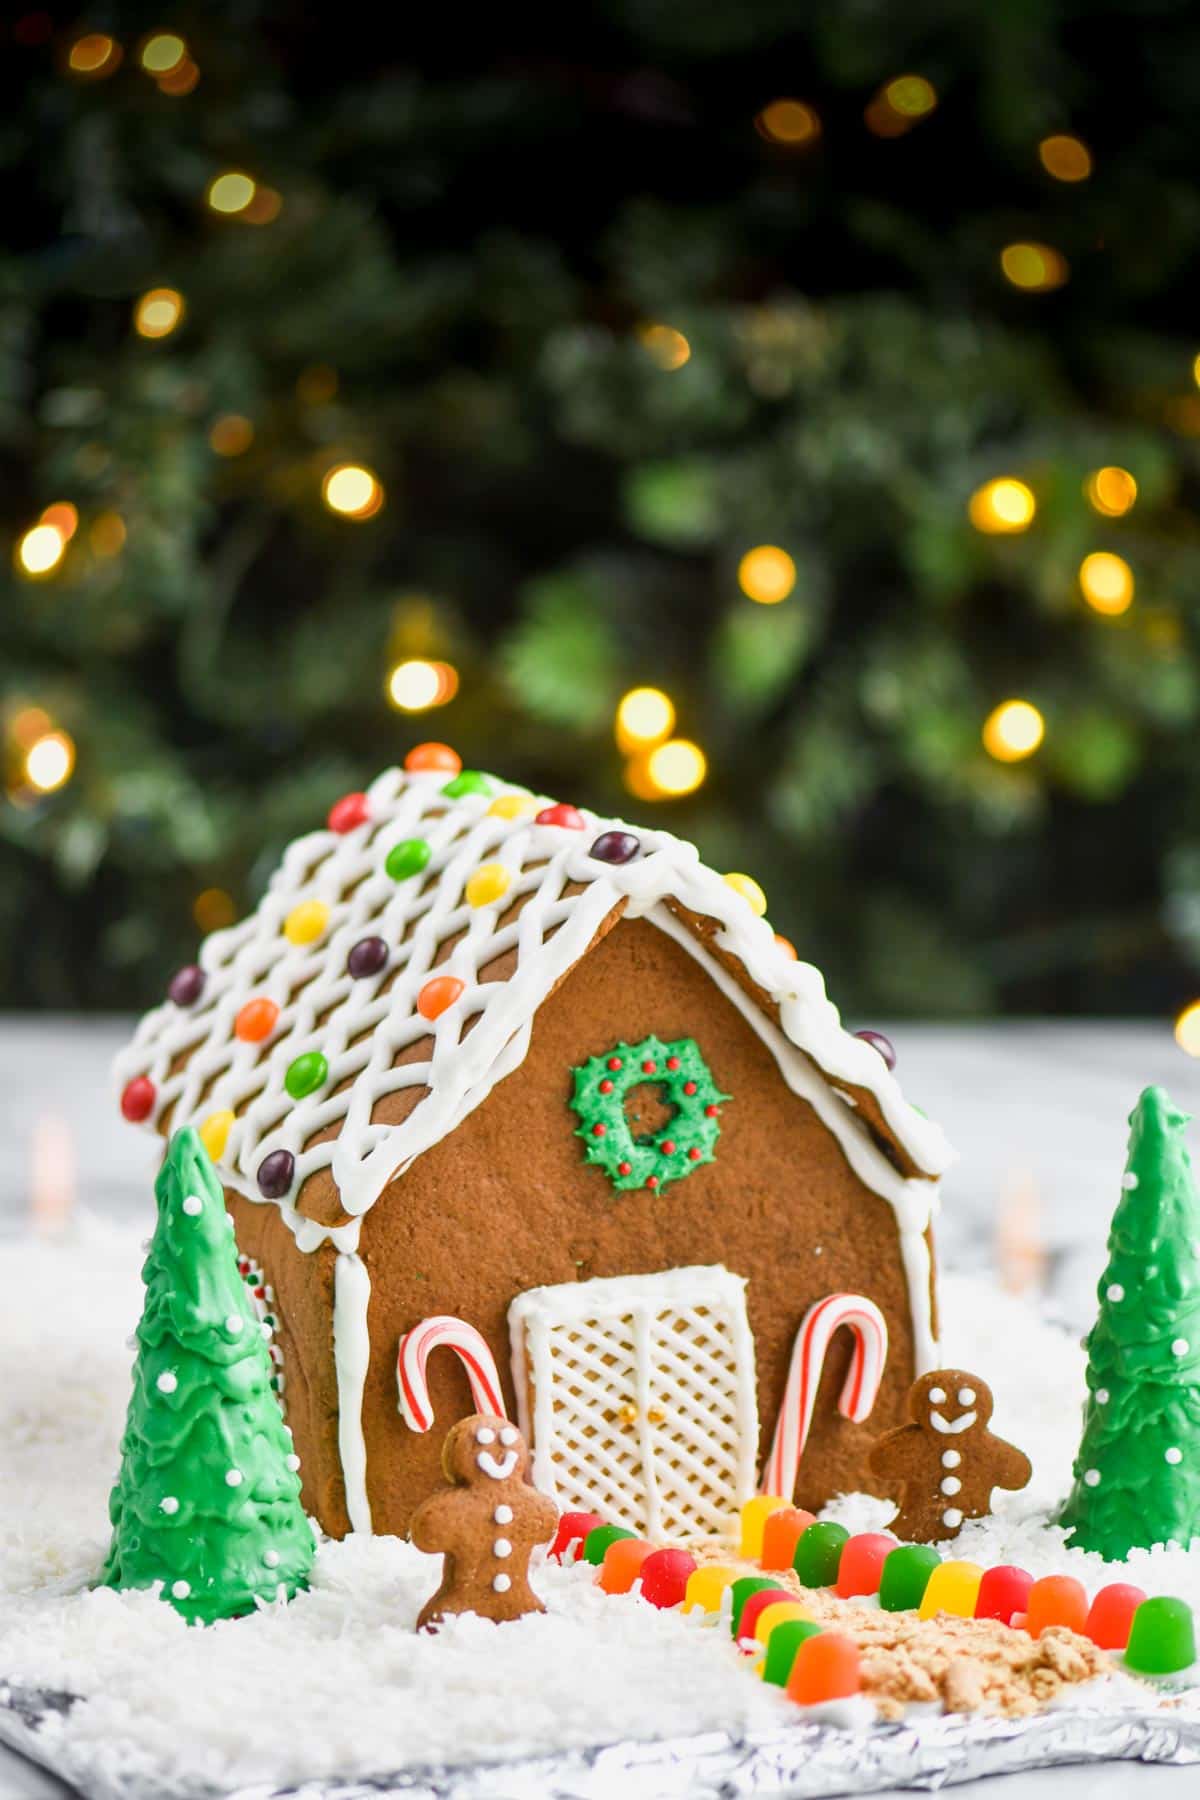 How to Make a Gingerbread House (Recipe Included)